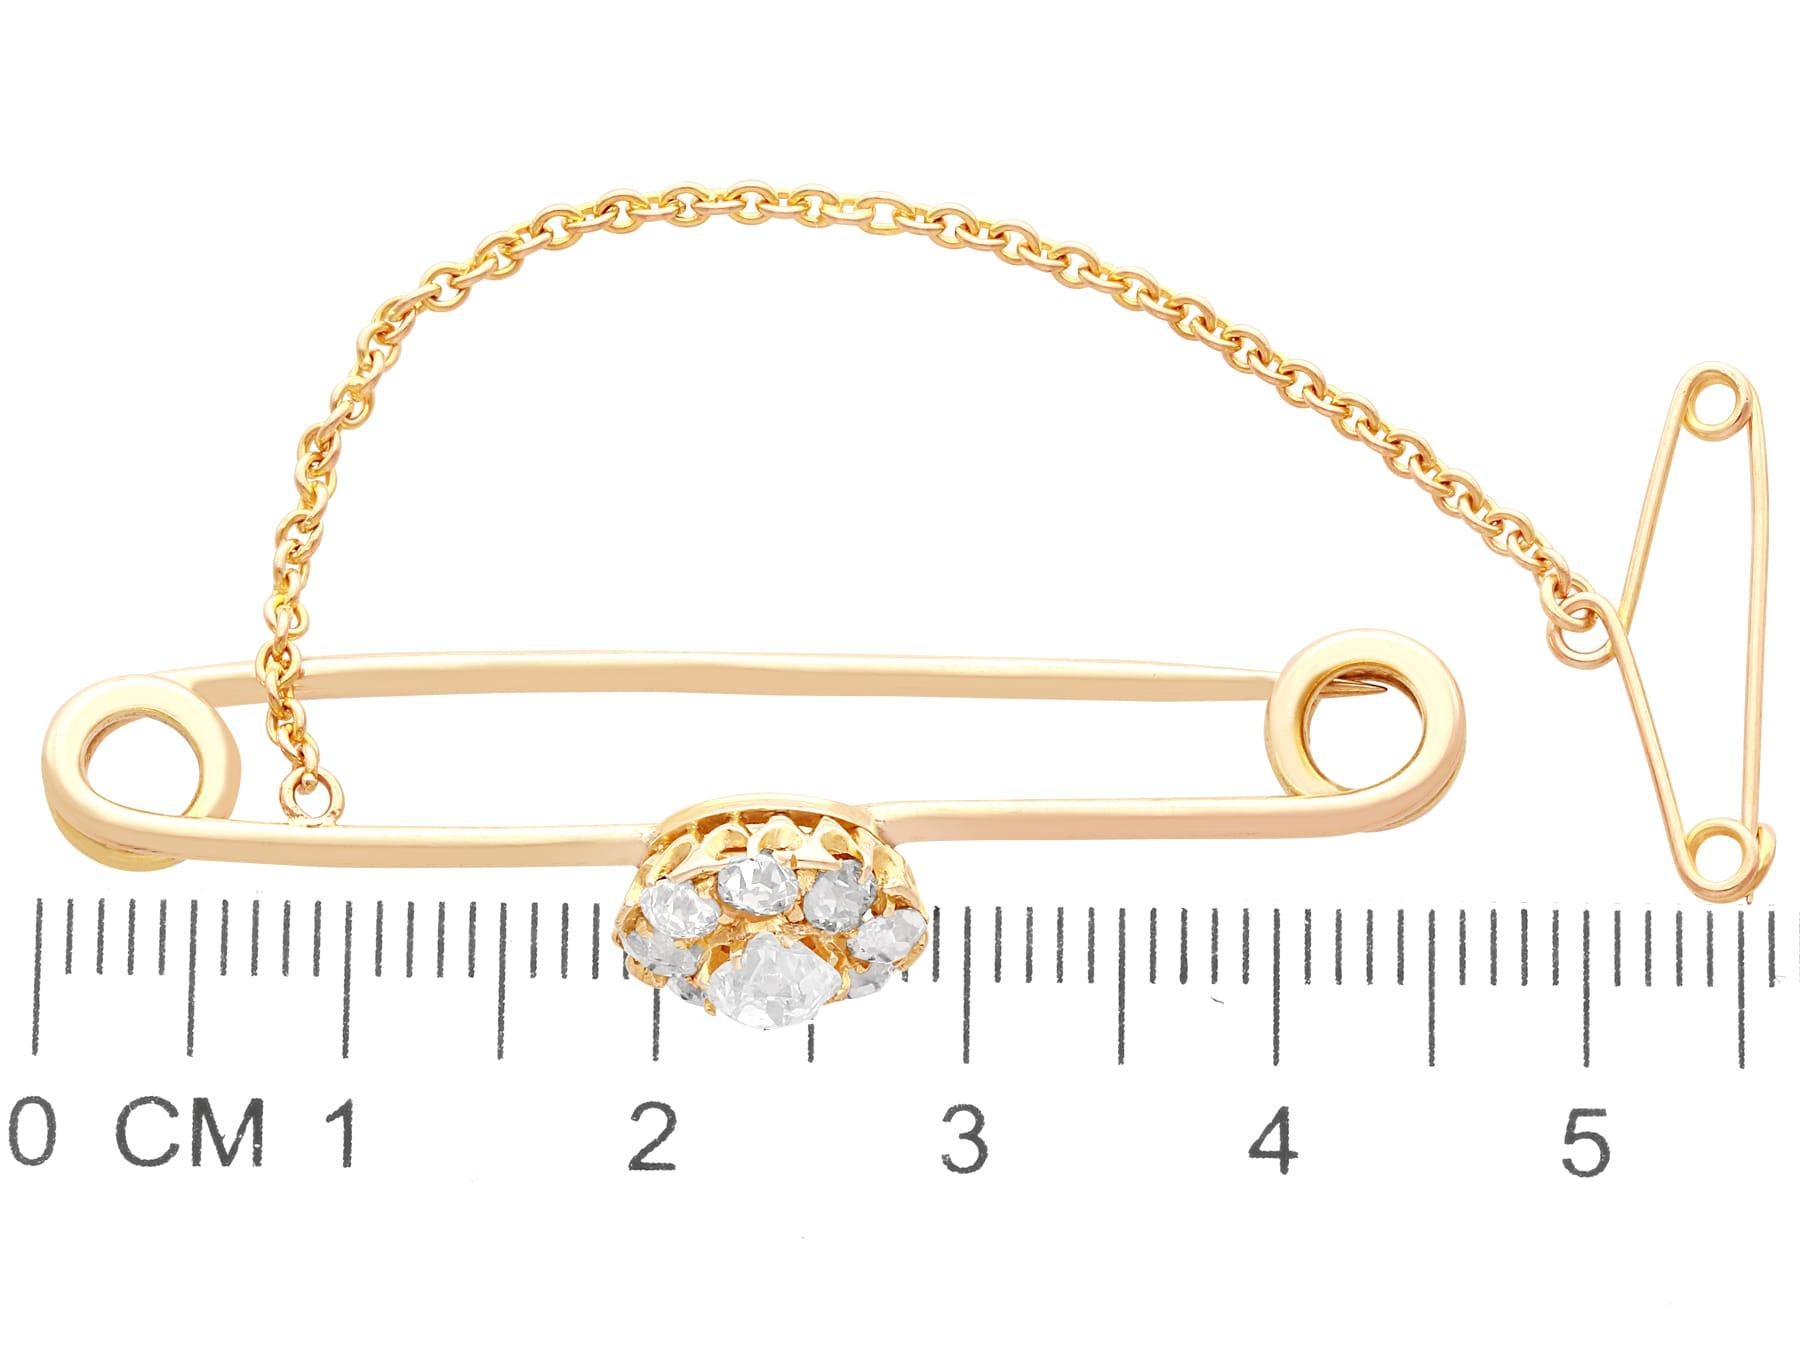 Antique Diamond and Yellow Gold Bar Brooch For Sale 3